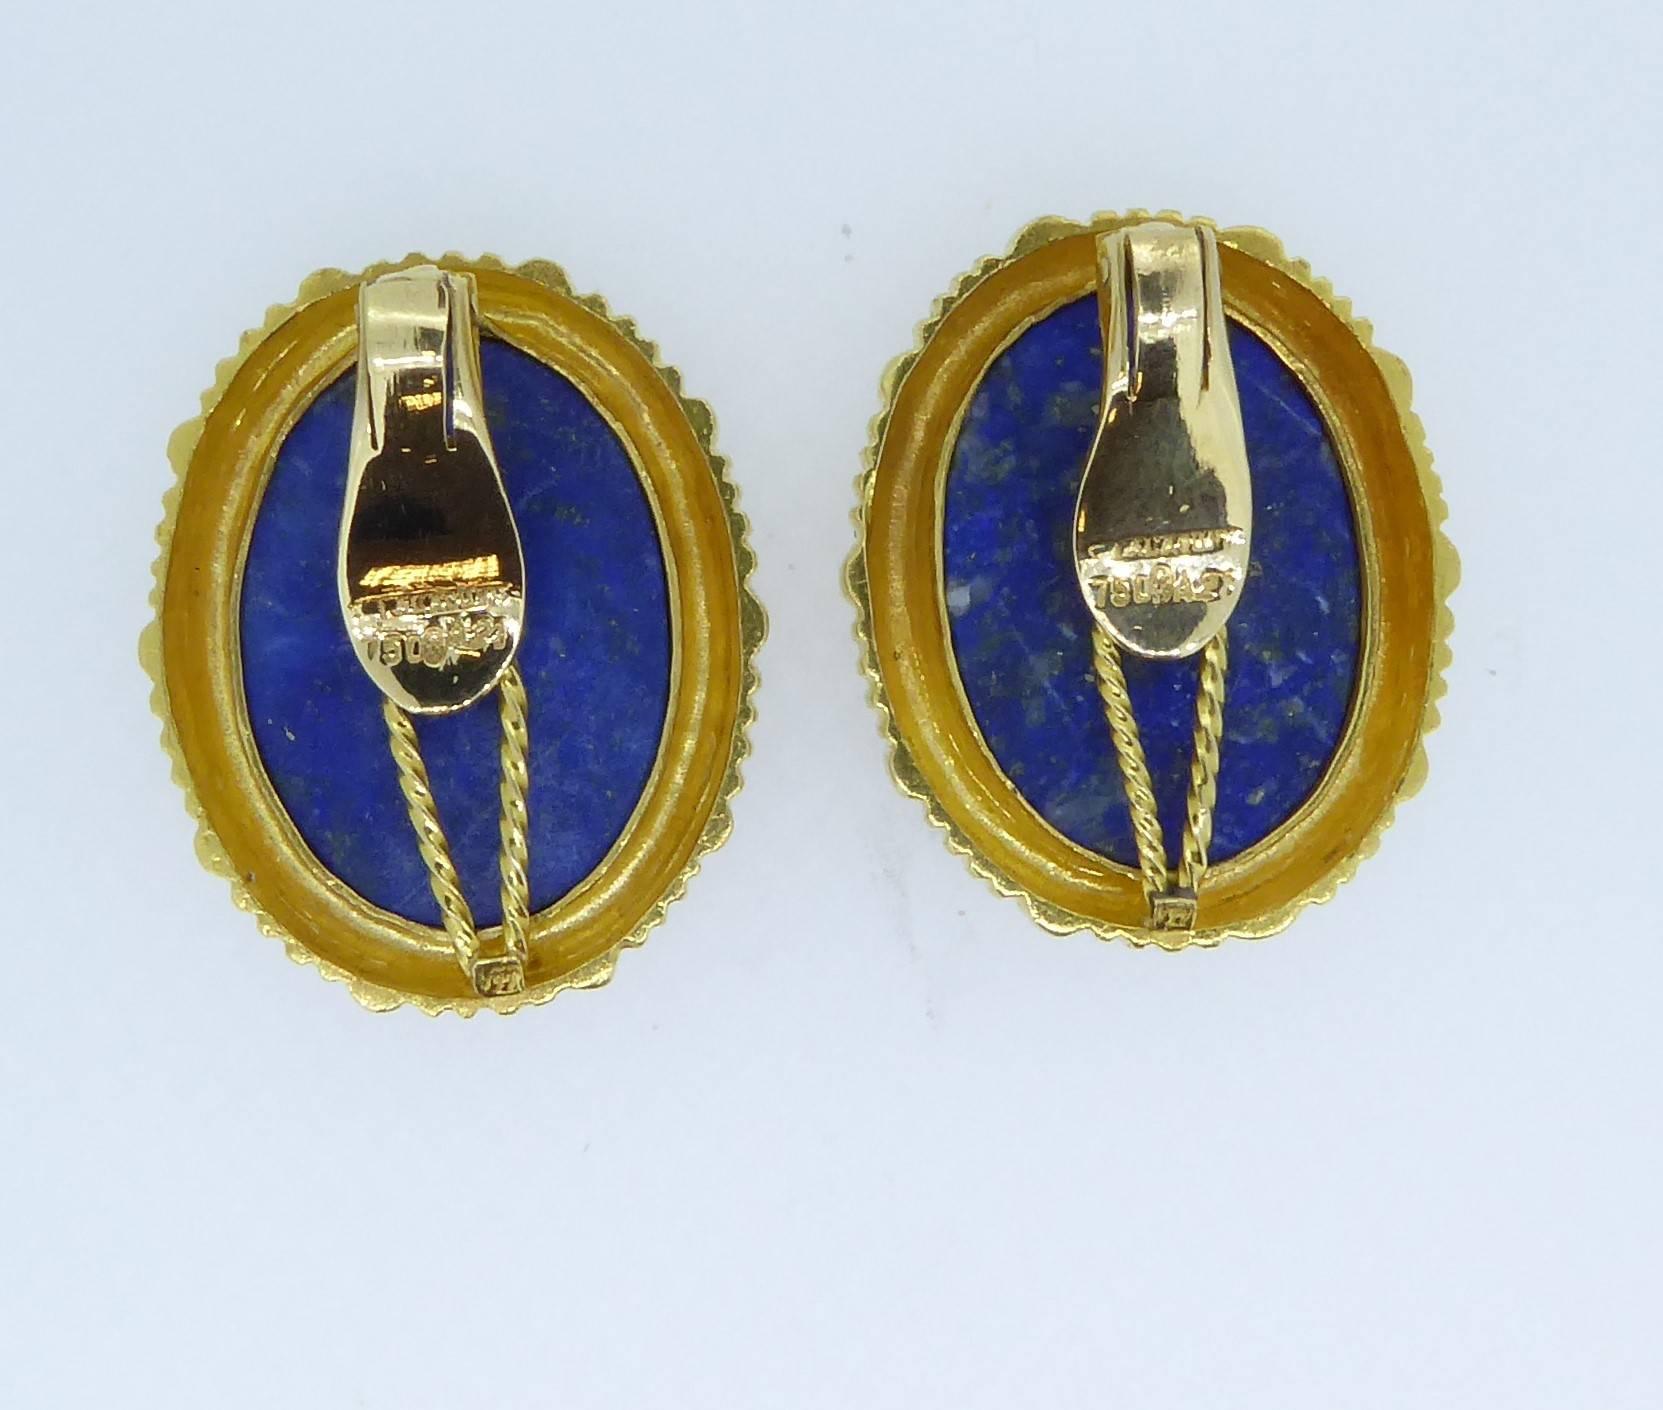 Lalaounis Lapis Lazuli And 18 Carat Yellow Gold Oval Ear Clips. The oval lapis lazuli framed by ribbed yellow gold. Vintage. Each earring with maker's mark for Lalaounis